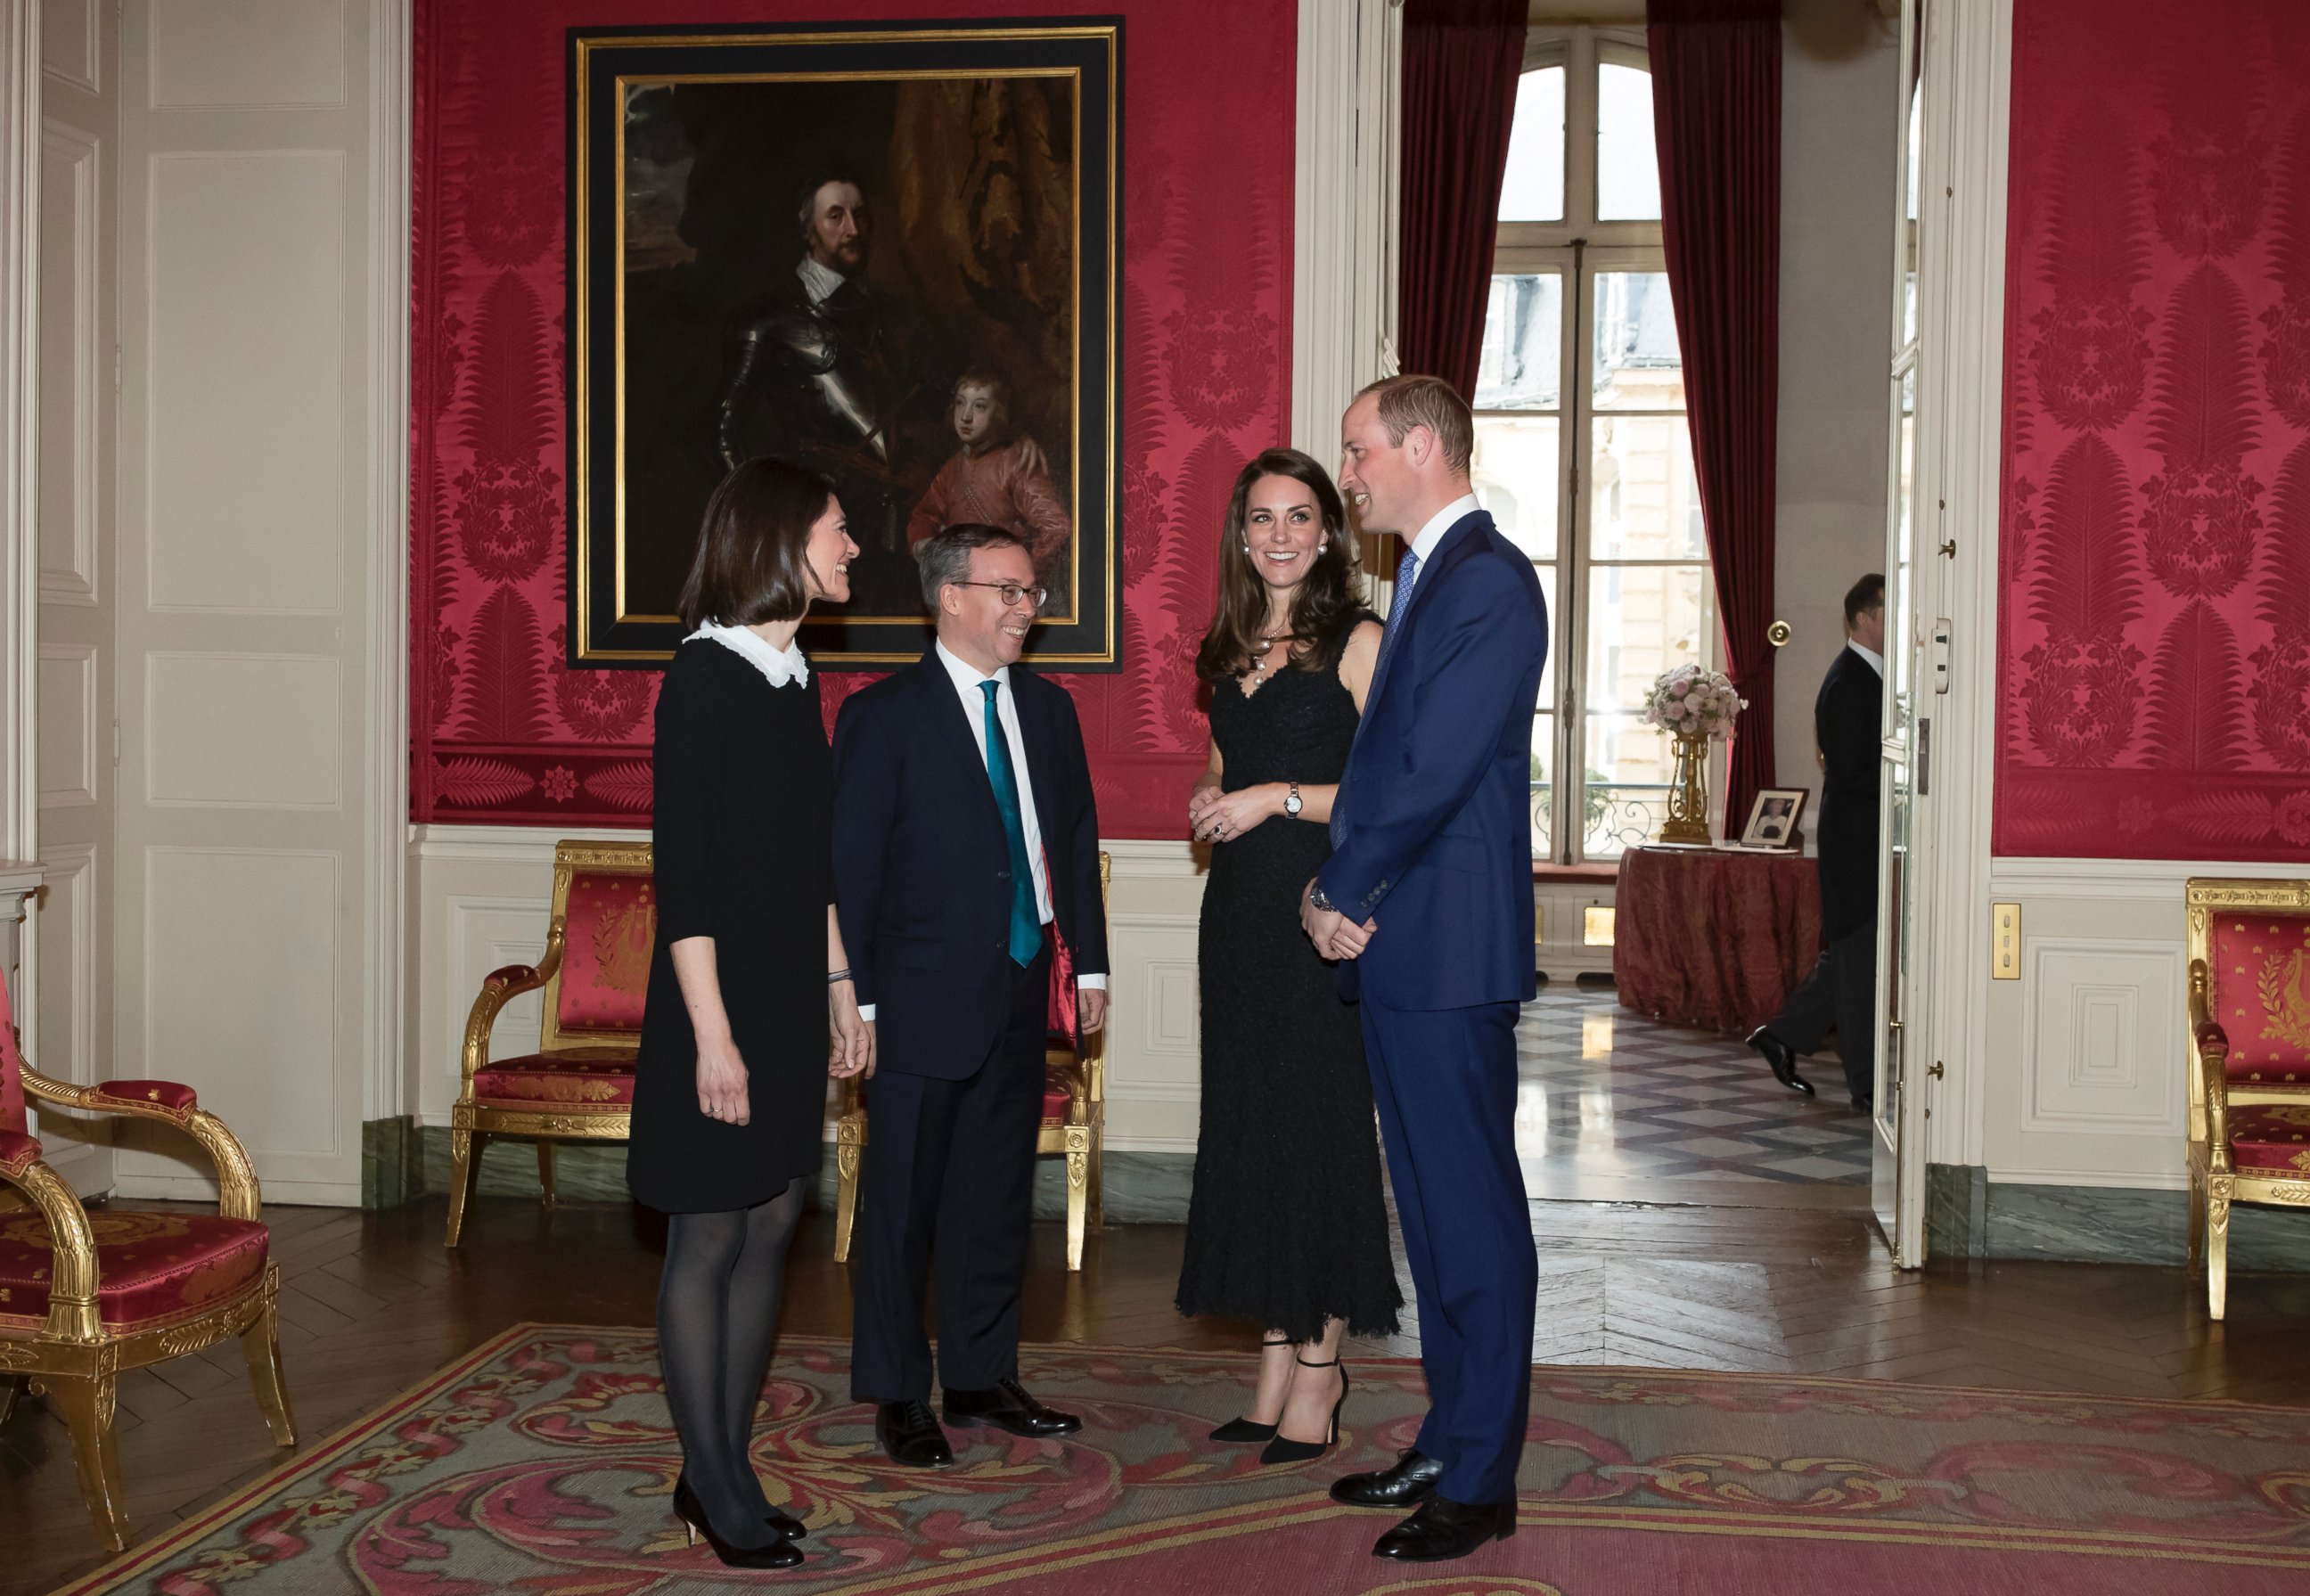 PHOTO: Britain's ambassador to France, Lord Ed Llewellyn, second left, and his wife Anne, greet Prince William and Kate, Duchess of Cambridge as they arrive for a reception at the British embassy in Paris, March 17, 2017.